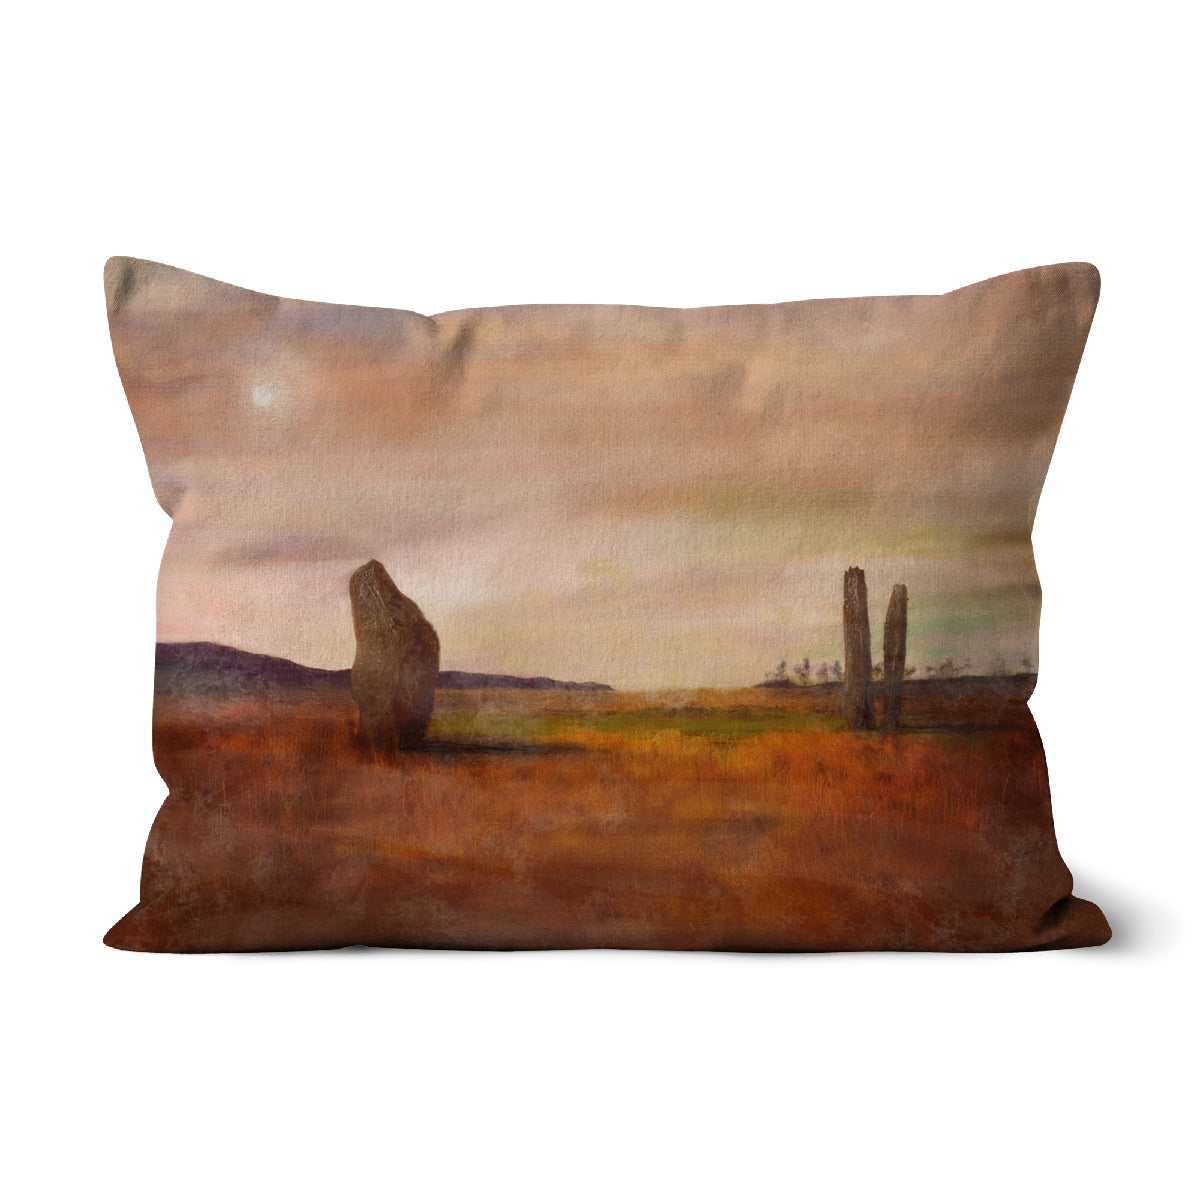 Machrie Moor Arran Art Gifts Cushion-Cushions-Arran Art Gallery-Canvas-19"x13"-Paintings, Prints, Homeware, Art Gifts From Scotland By Scottish Artist Kevin Hunter